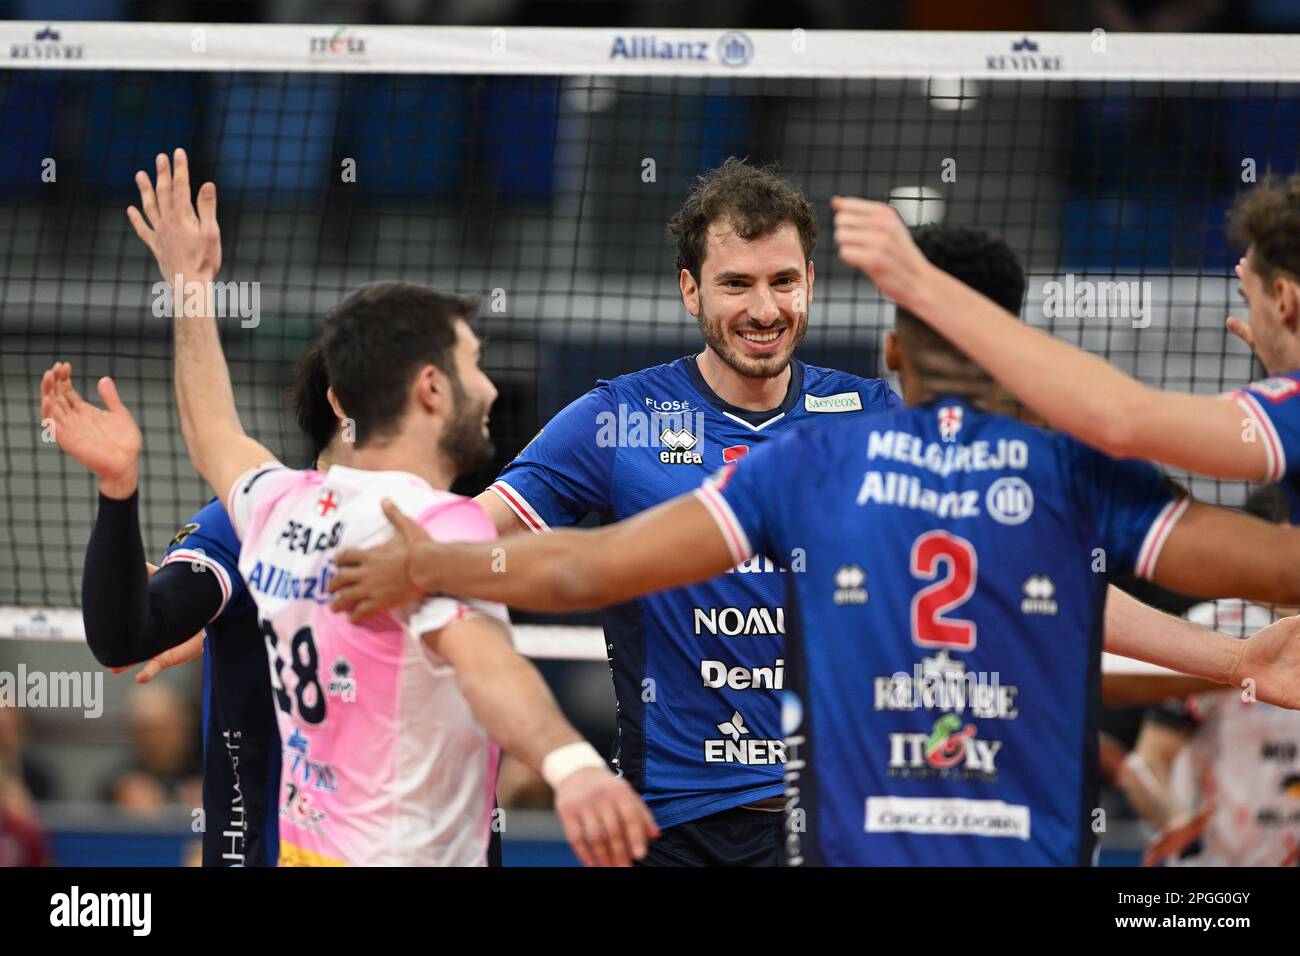 power volley milano live